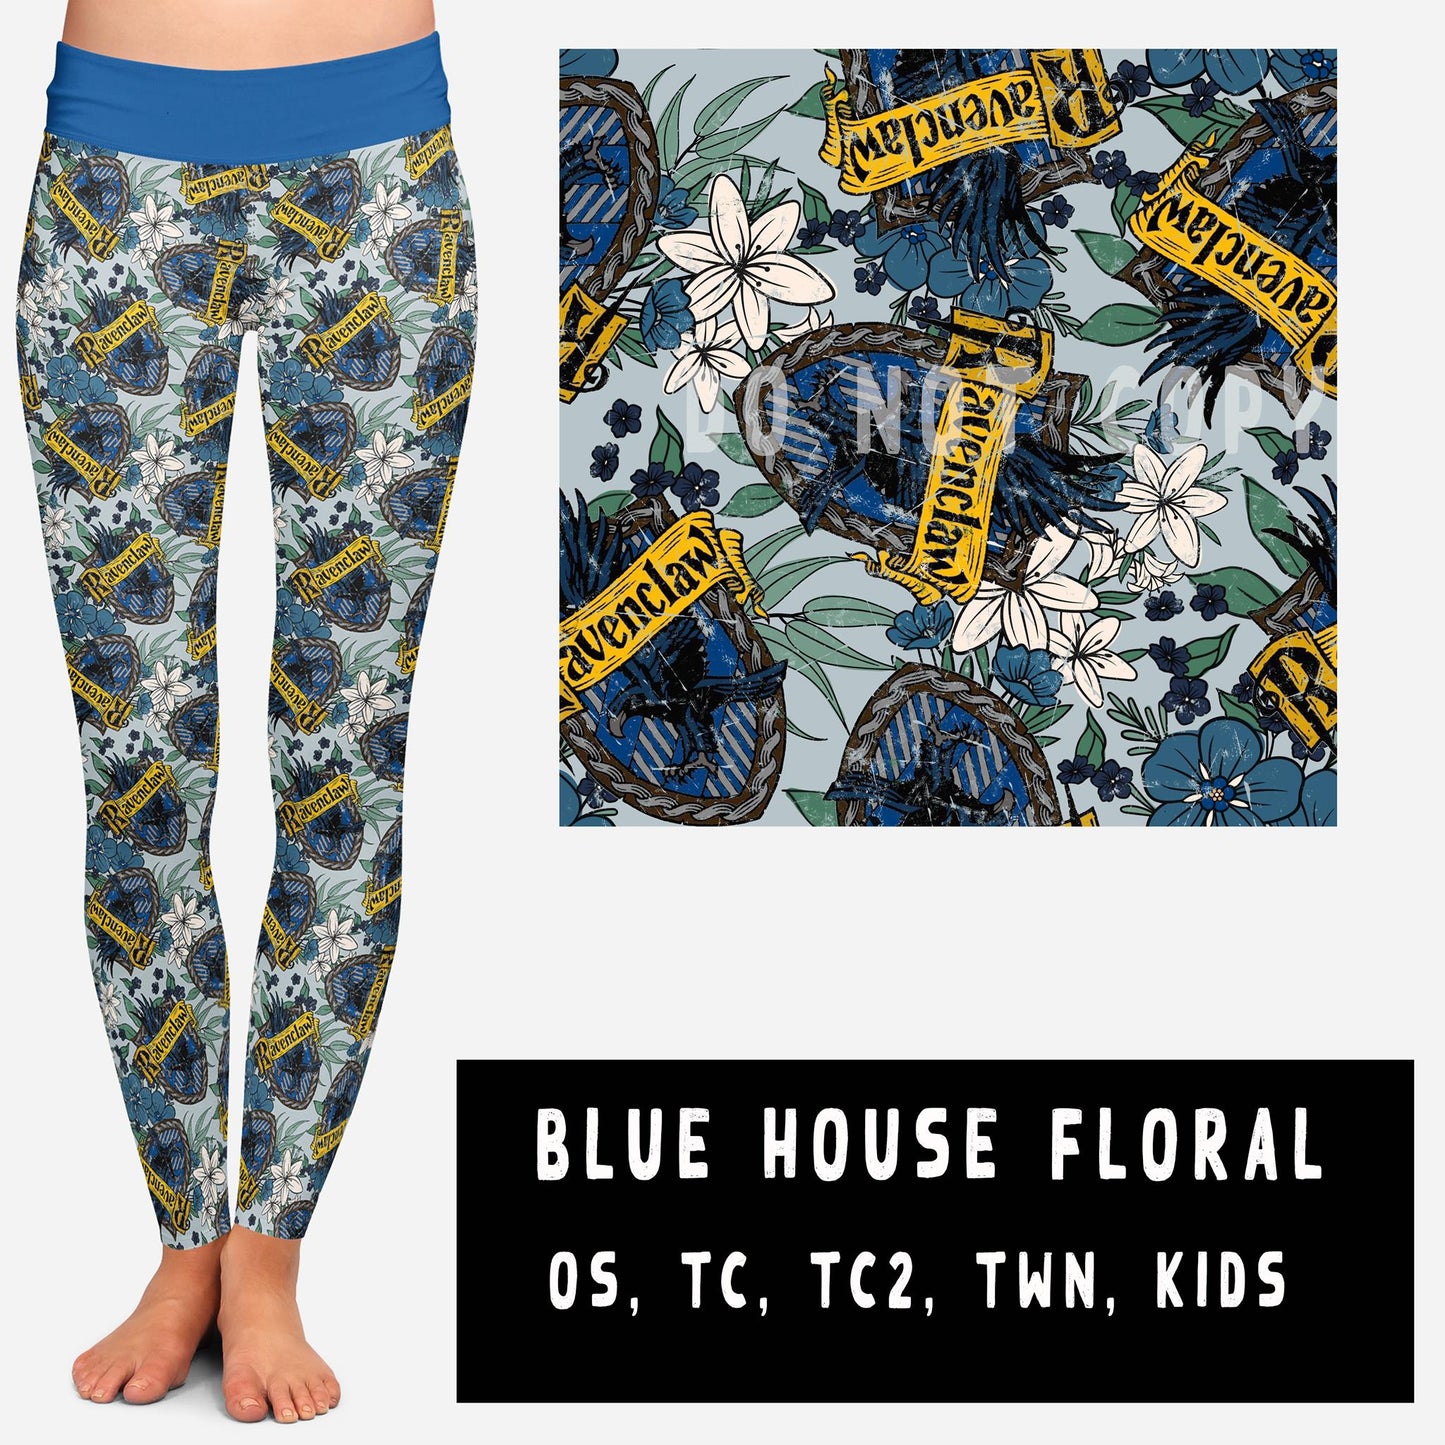 OUTFIT RUN 3-BLUE HOUSE FLORAL